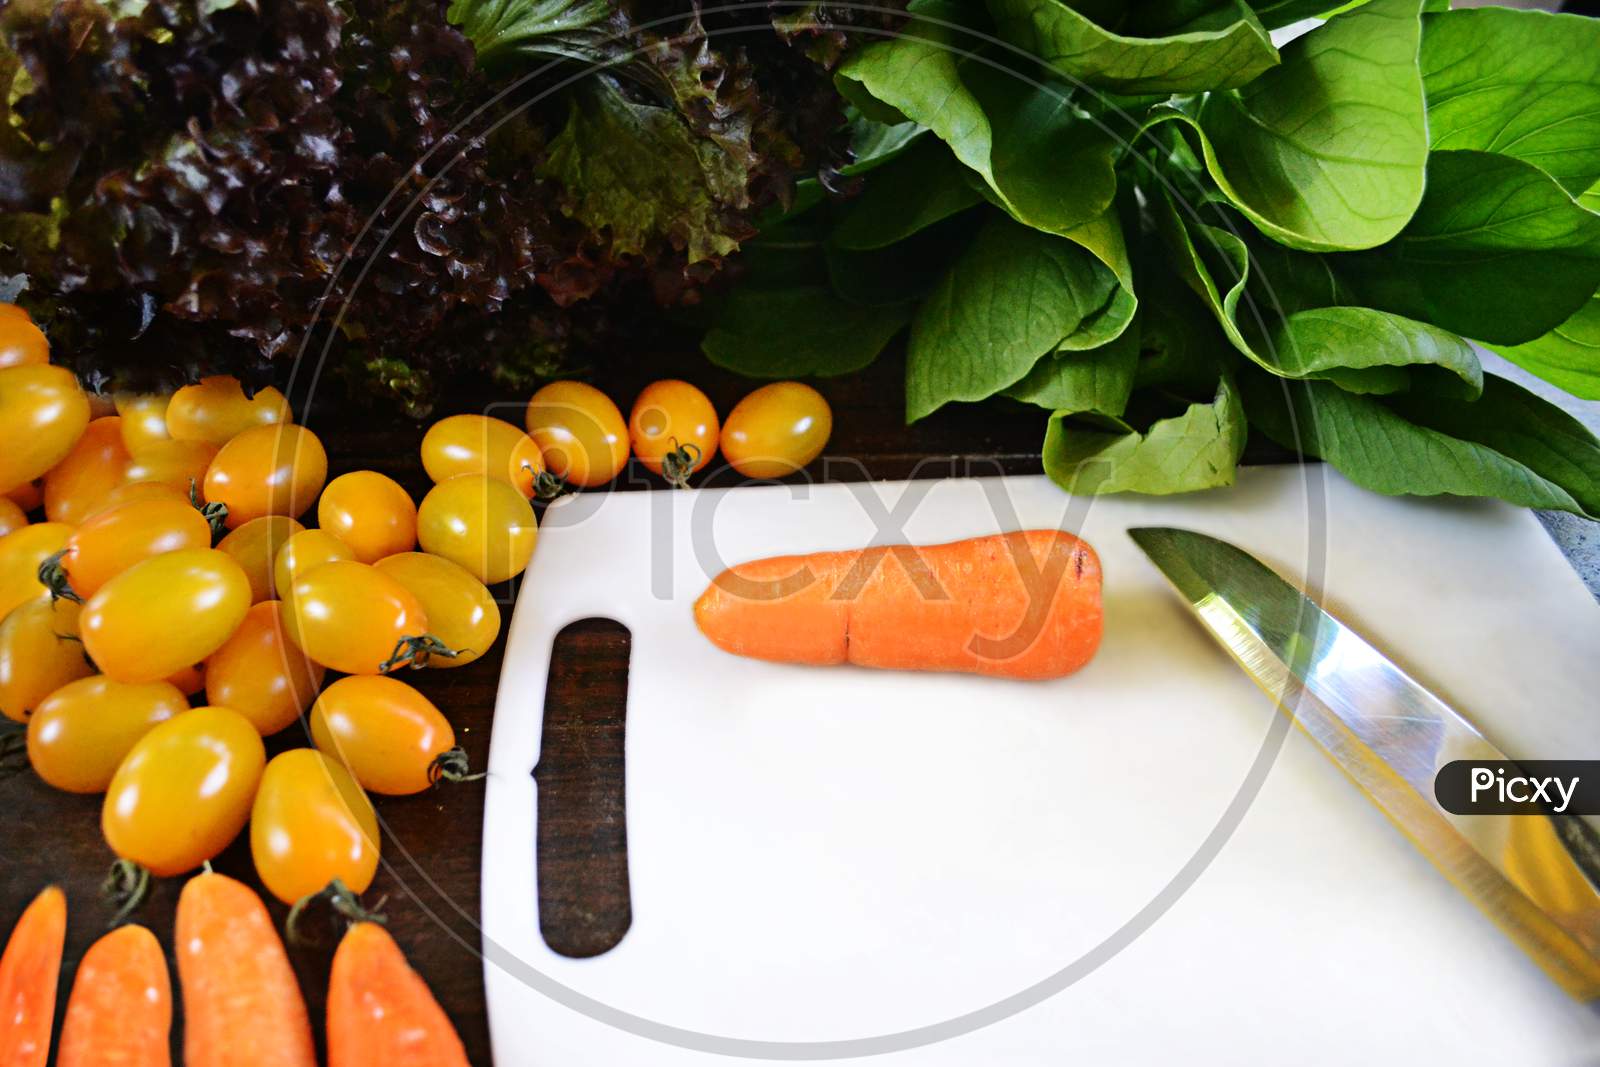 Organic Vegetables Ingredients Around White Cutting Board With Carrot And Knife